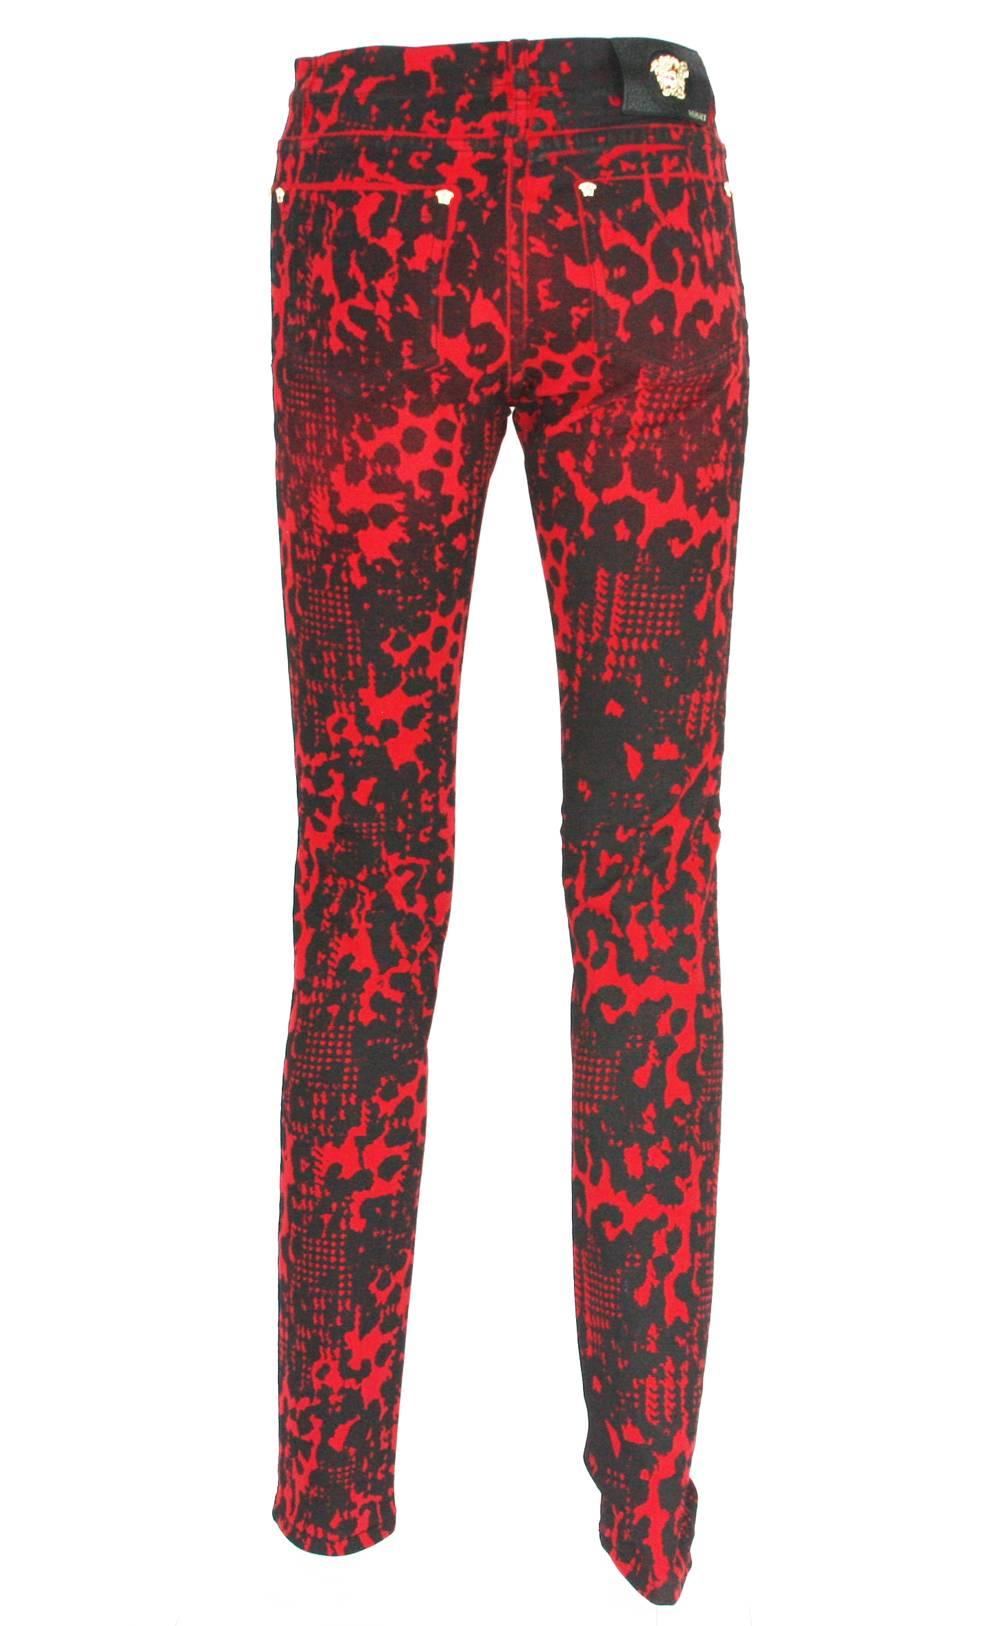 red and black jeans